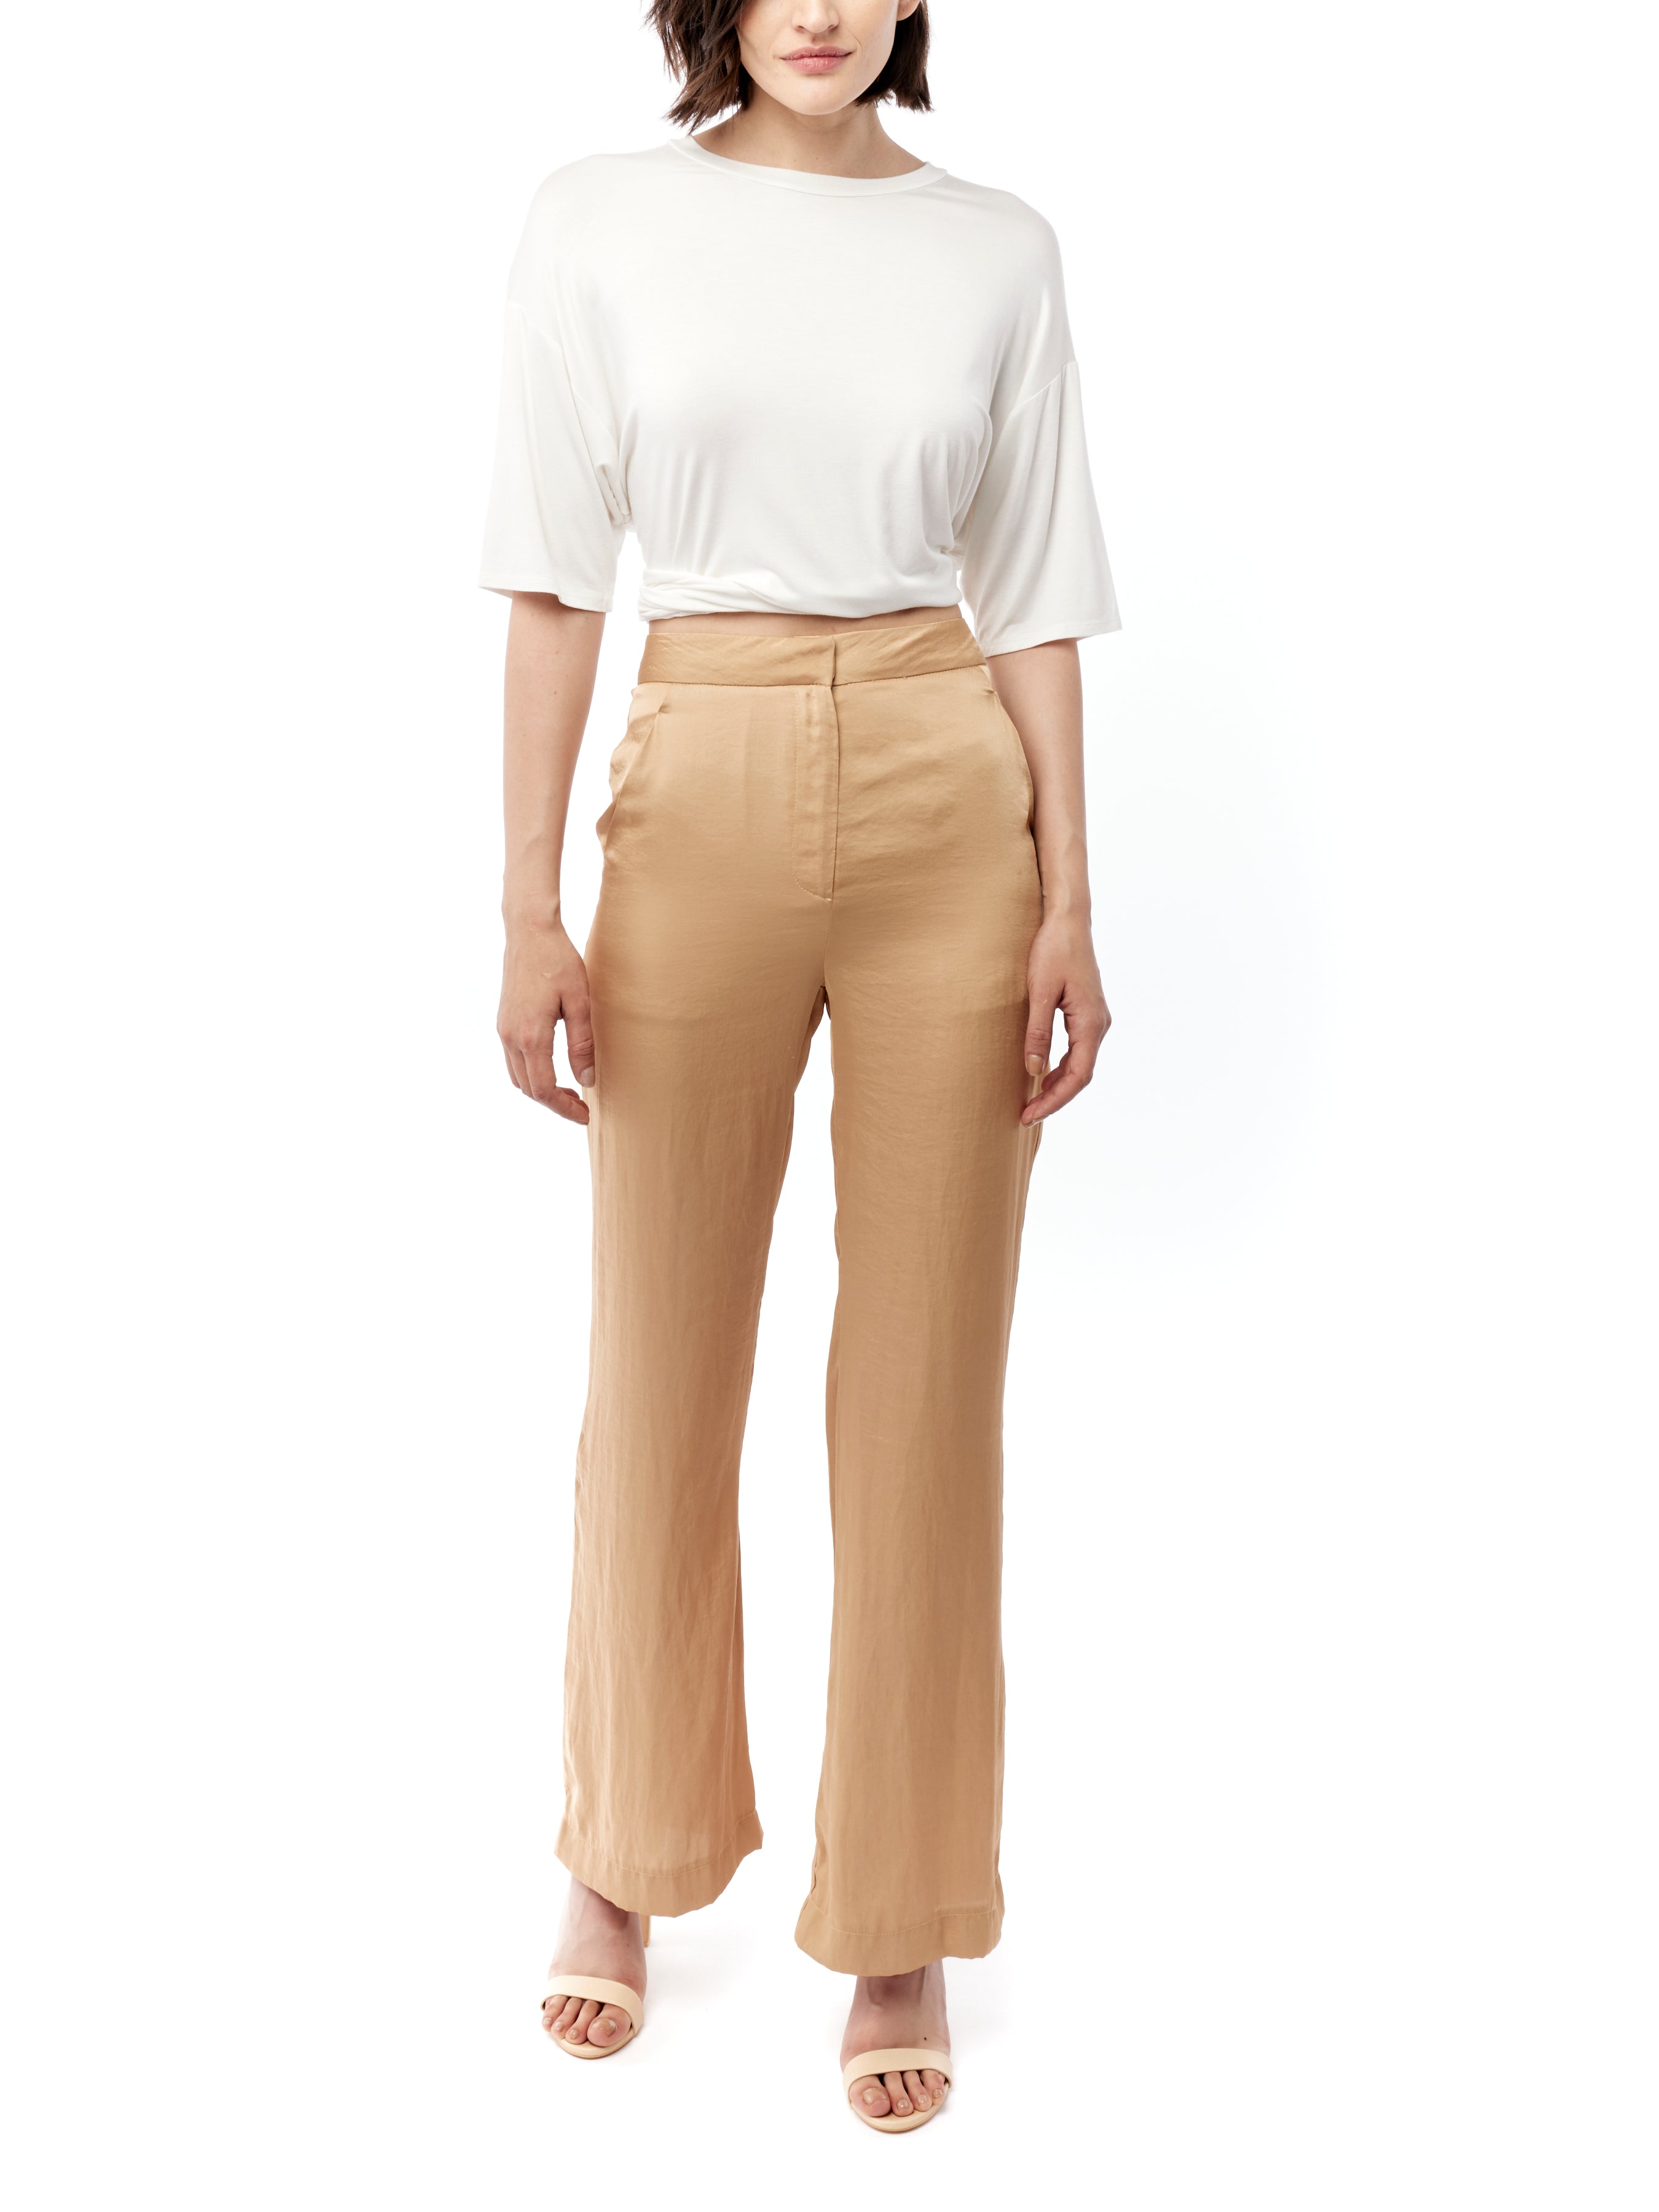 Mid-rise pant in a fluid satin featuring side pockets in honey